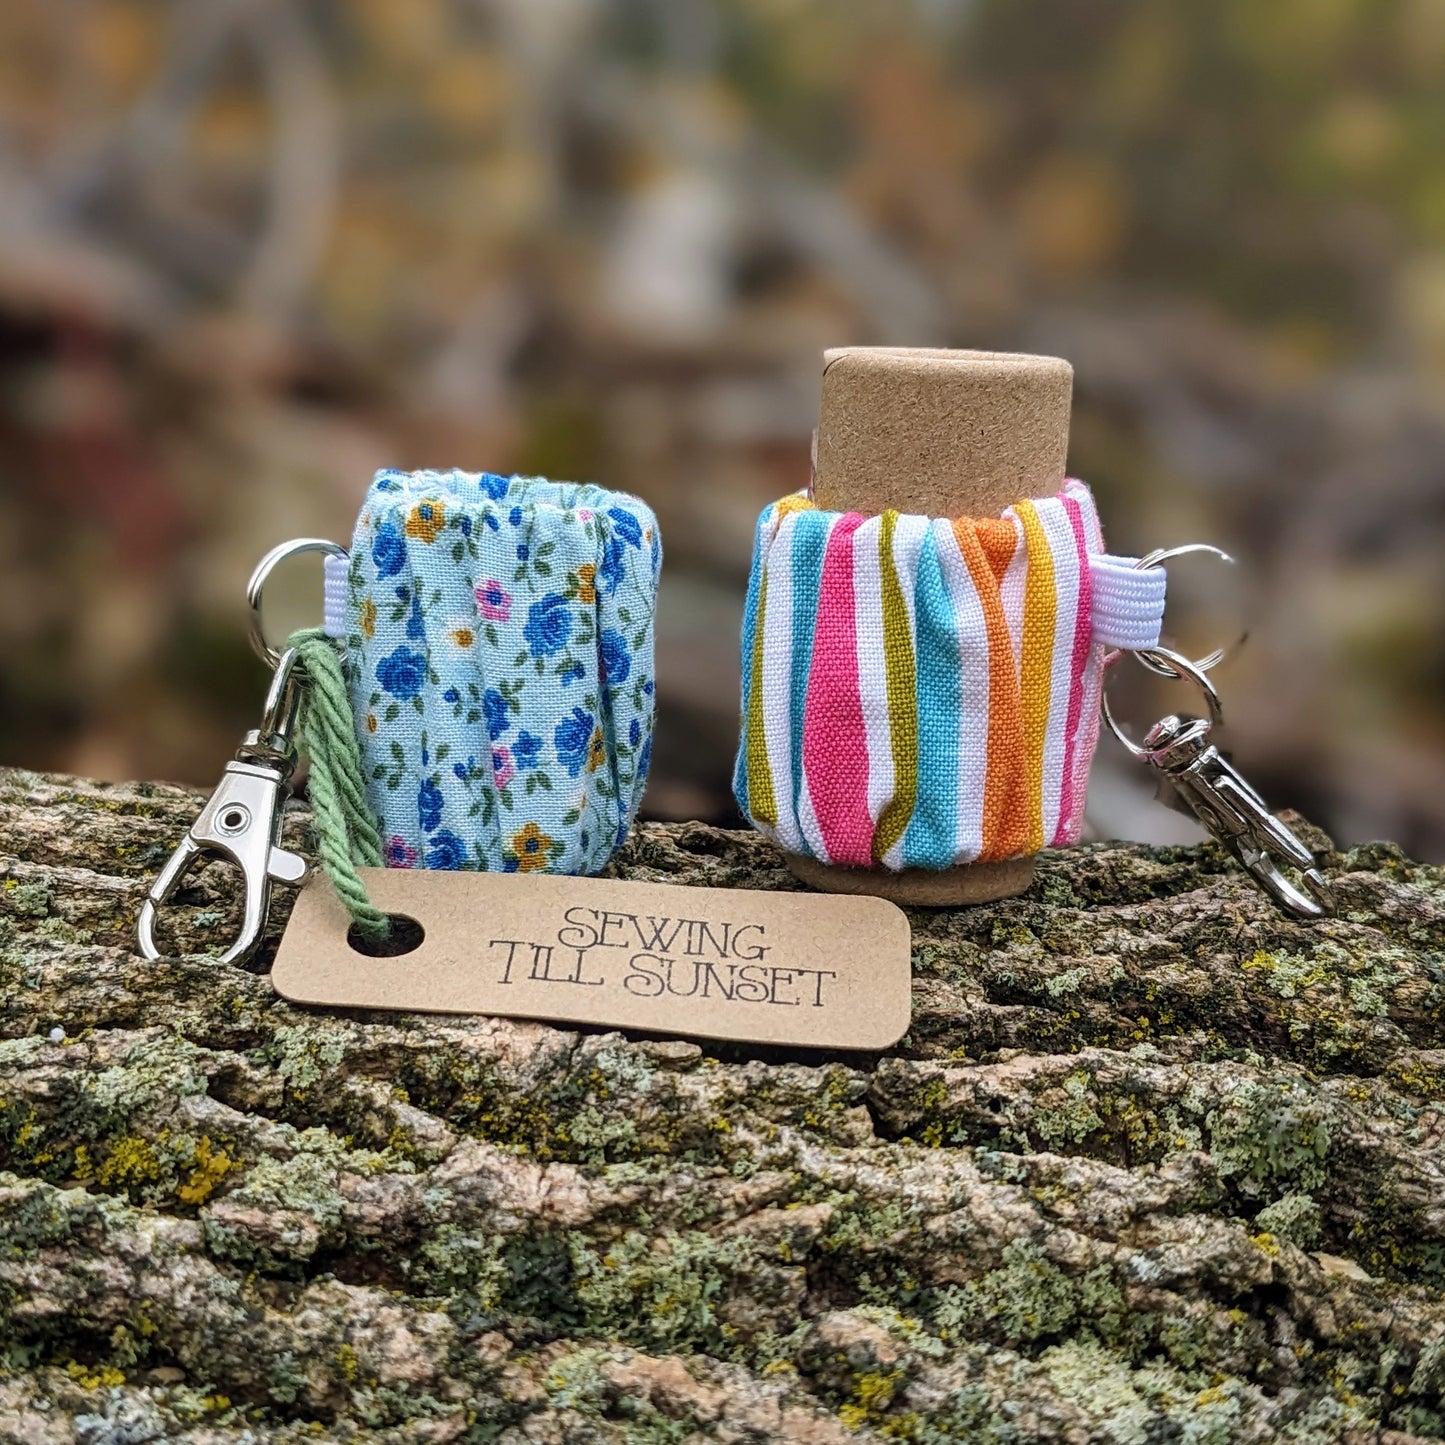 Handmade Lip Balm Holder - Fabric Chapstick Holder with Keychain Clip. Pair with our Zero Waste Plastic Free Lip Chap!